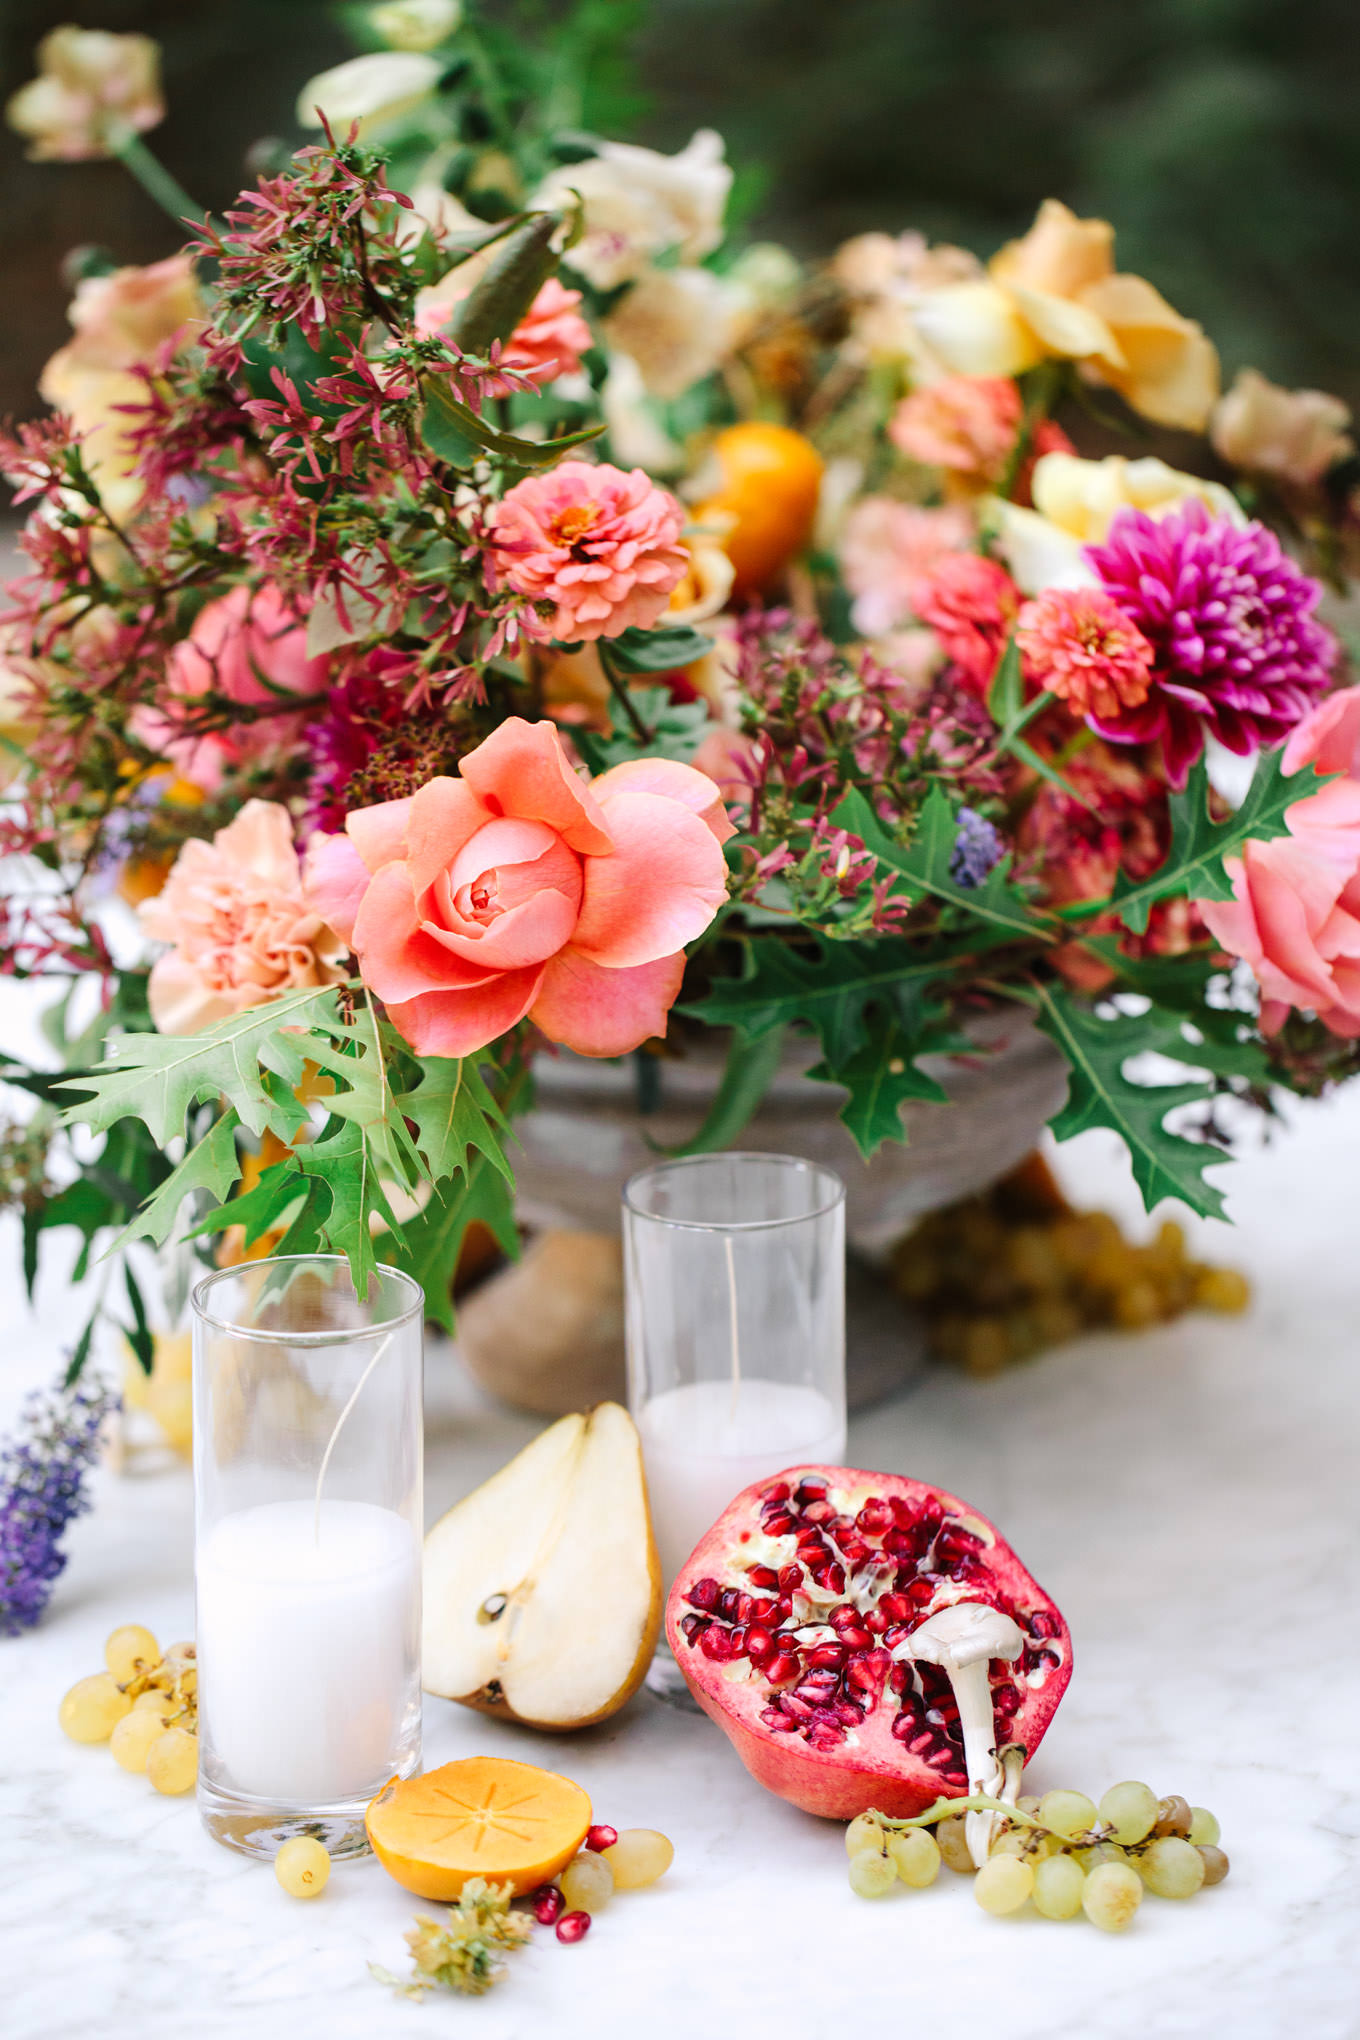 Pomegranate, citrus, and mushroom table decor accents | Engagement, elopement, and wedding photography roundup of Mary Costa’s favorite images from 2020 | Colorful and elevated photography for fun-loving couples in Southern California | #2020wedding #elopement #weddingphoto #weddingphotography #microwedding   Source: Mary Costa Photography | Los Angeles